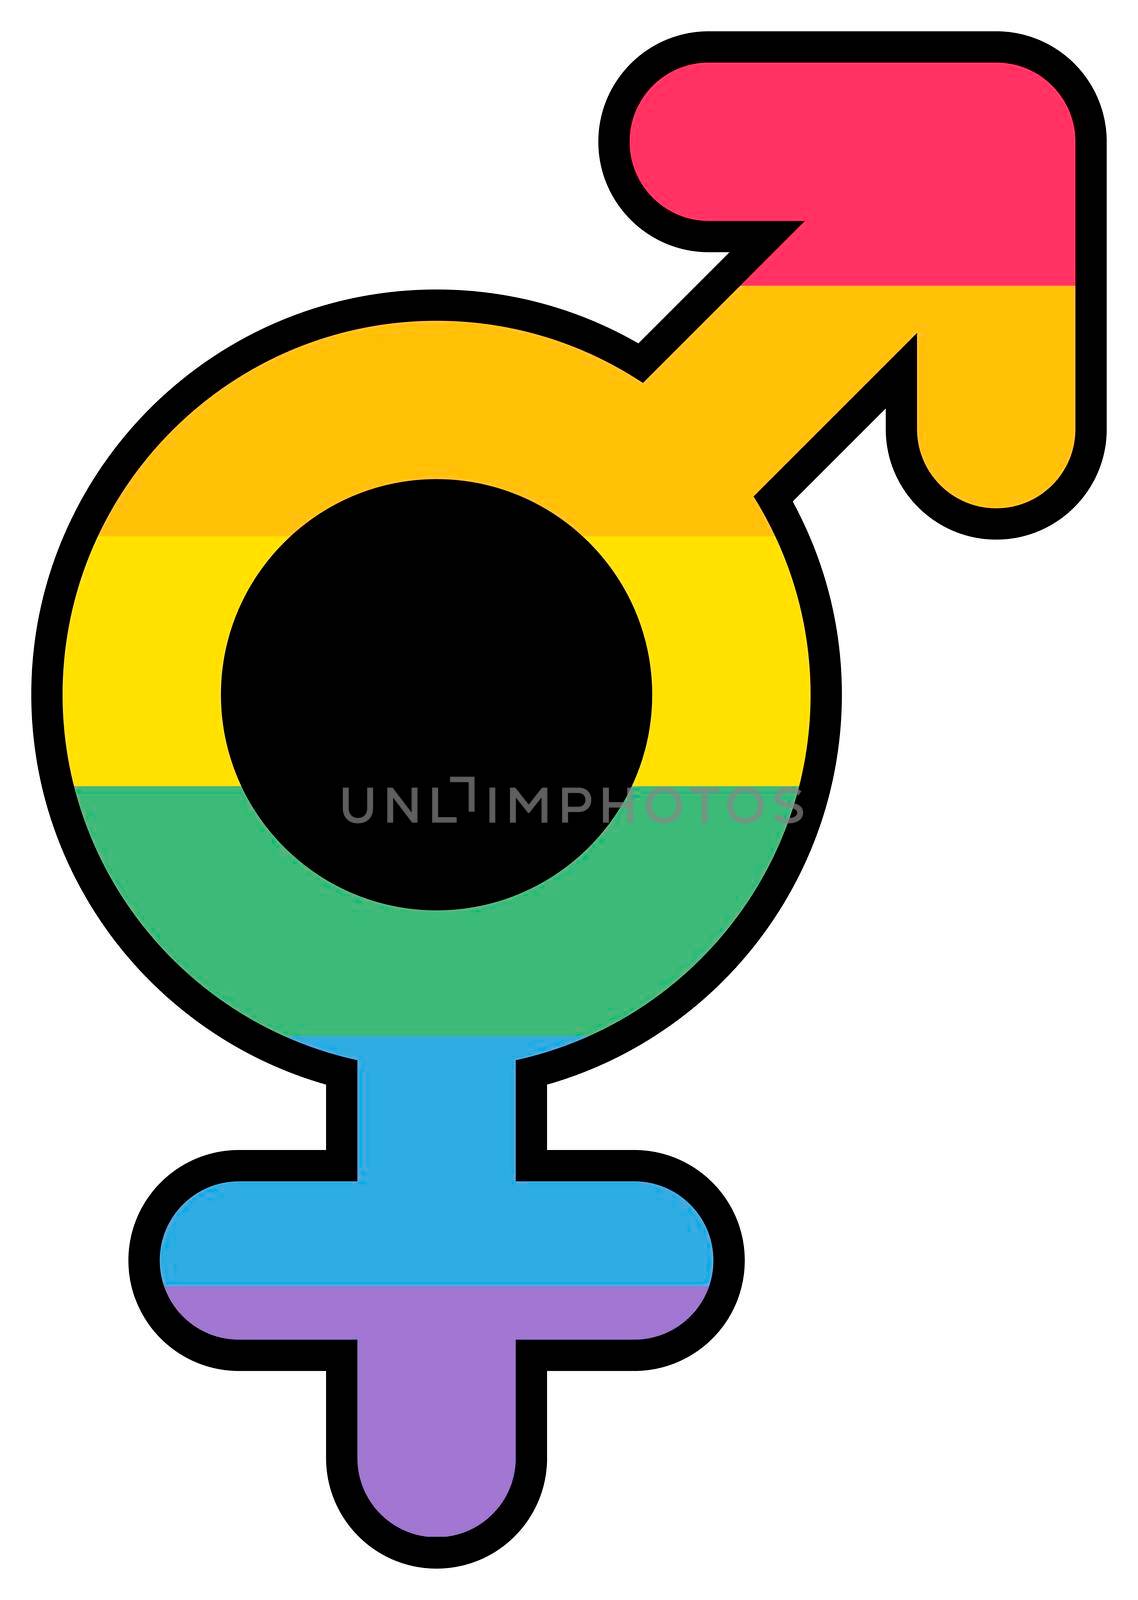 Bigender love lgbtqi male and female mark vector. Men and women bisexual orientation relation sign multicolor lgbt rainbow spectrum. Solidary international celebrate day flat cartoon illustration